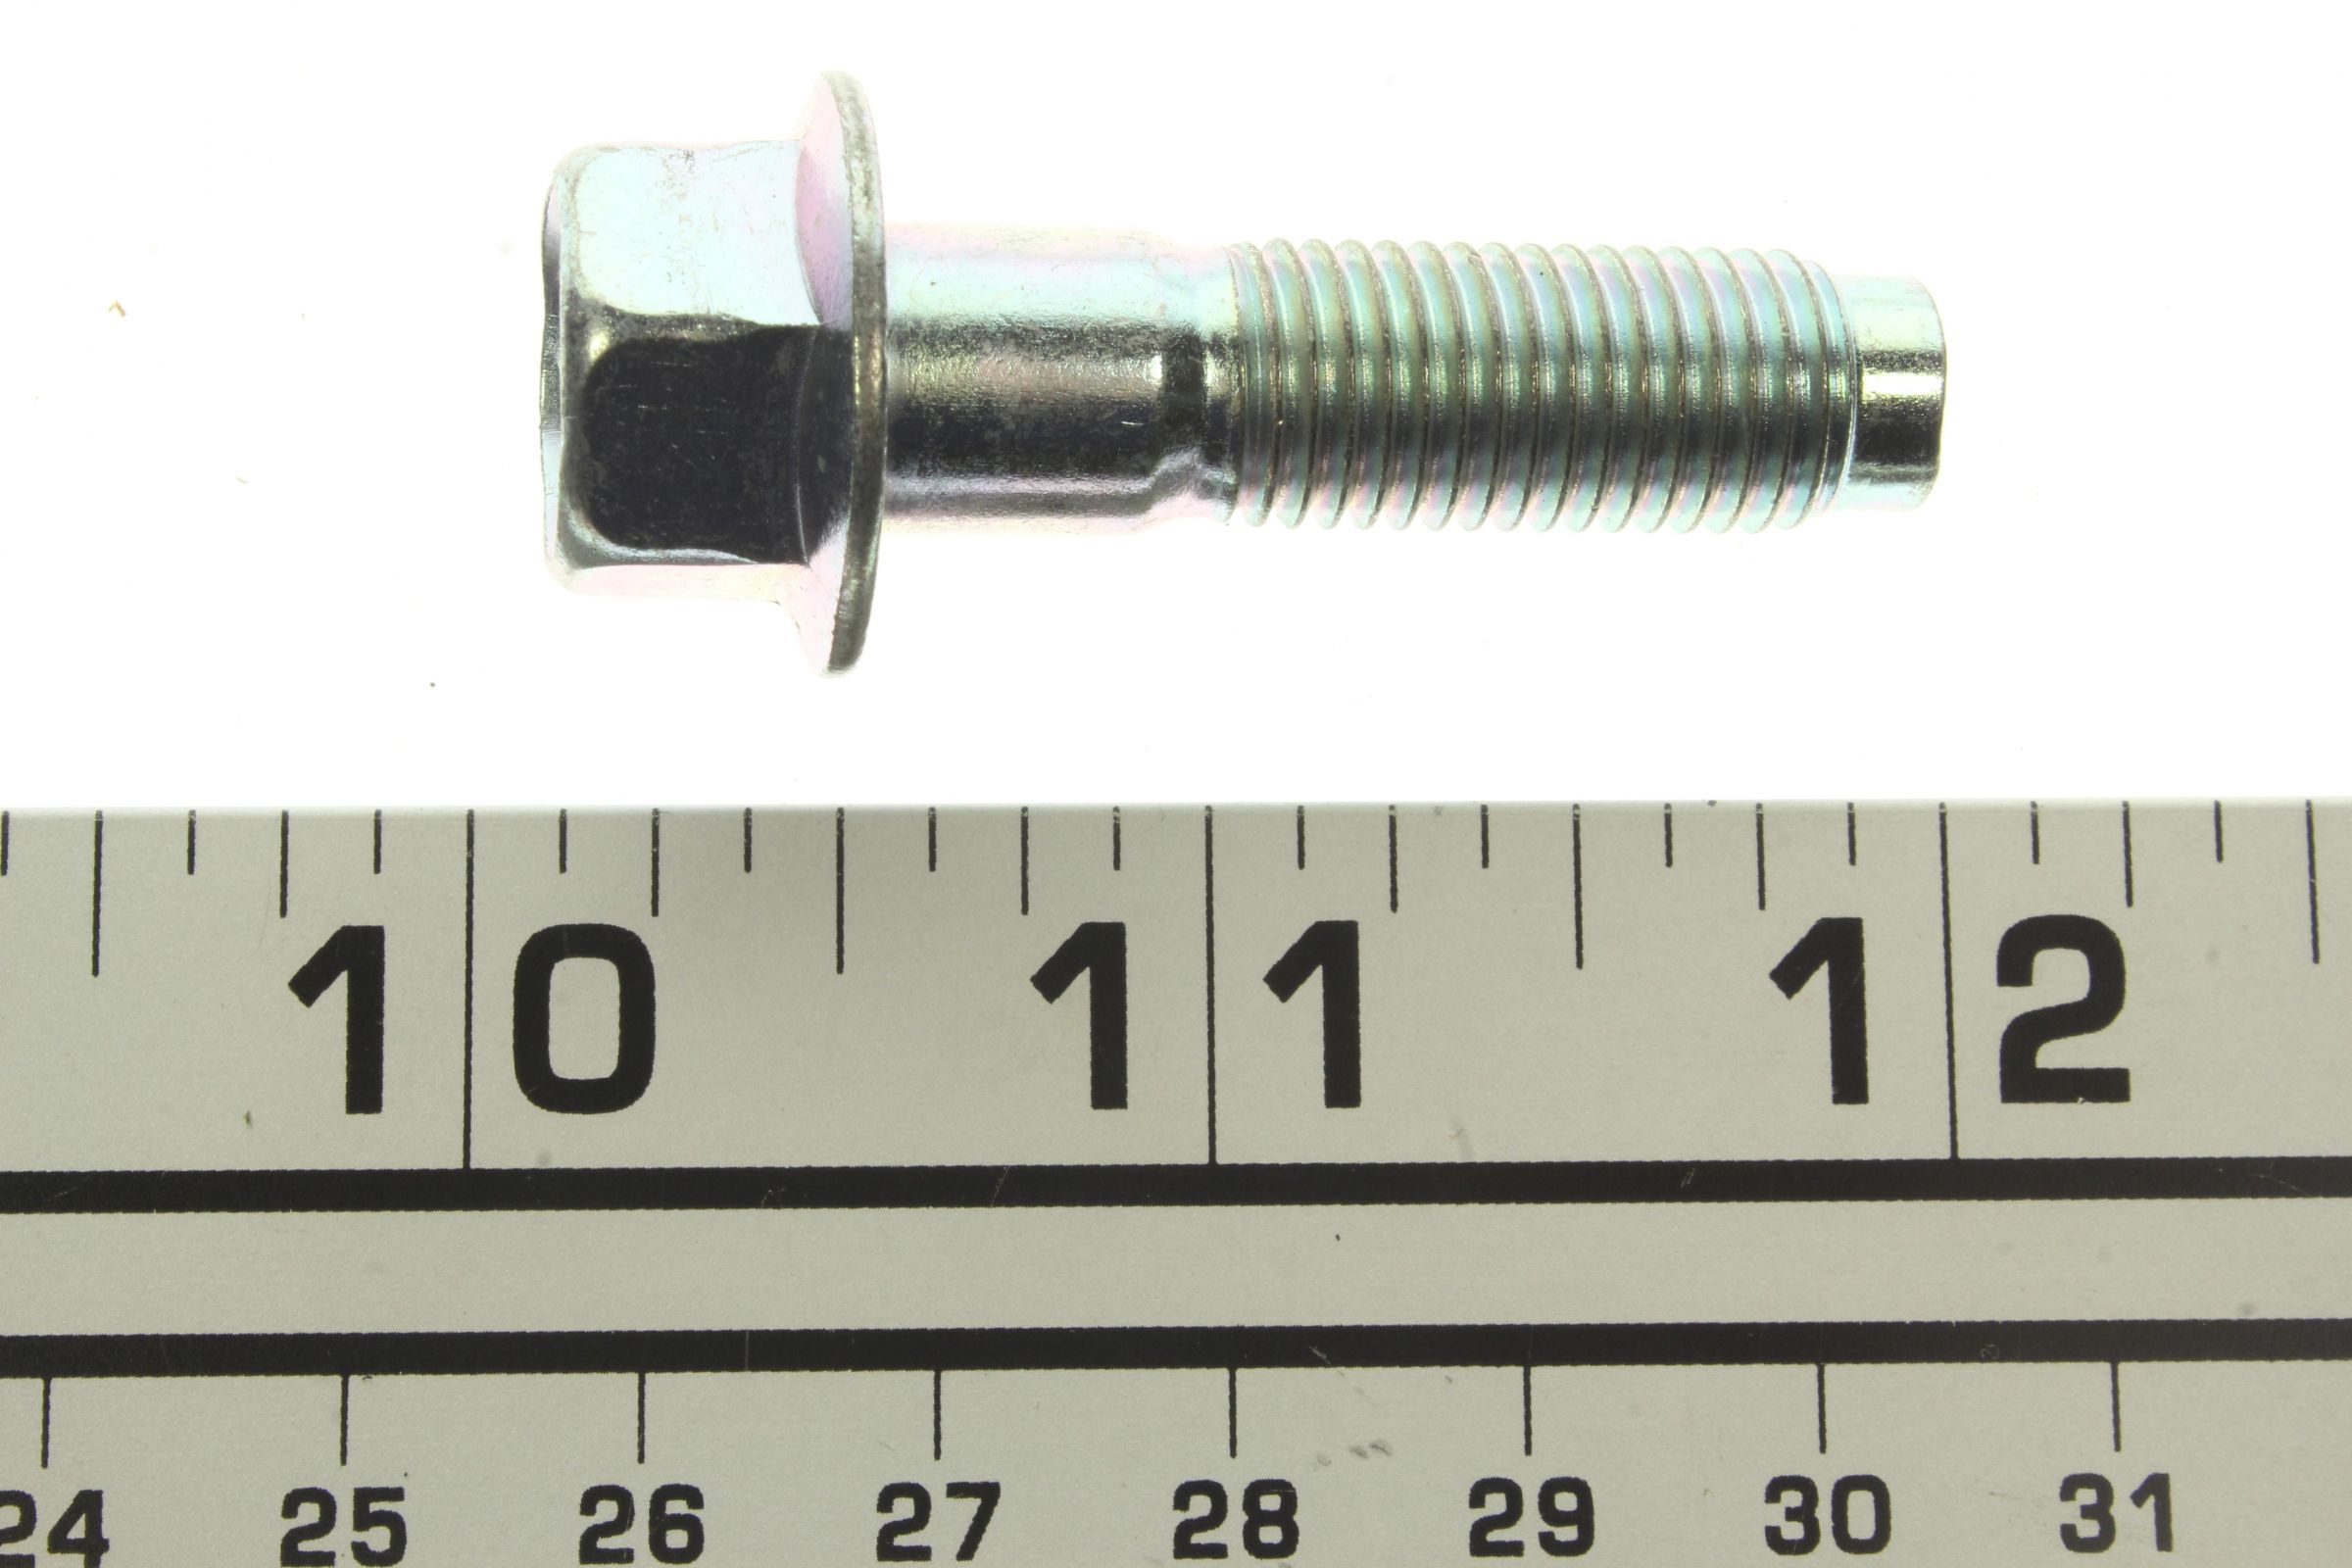 90109-10030-00 Superseded by 90109-10032-00 - BOLT